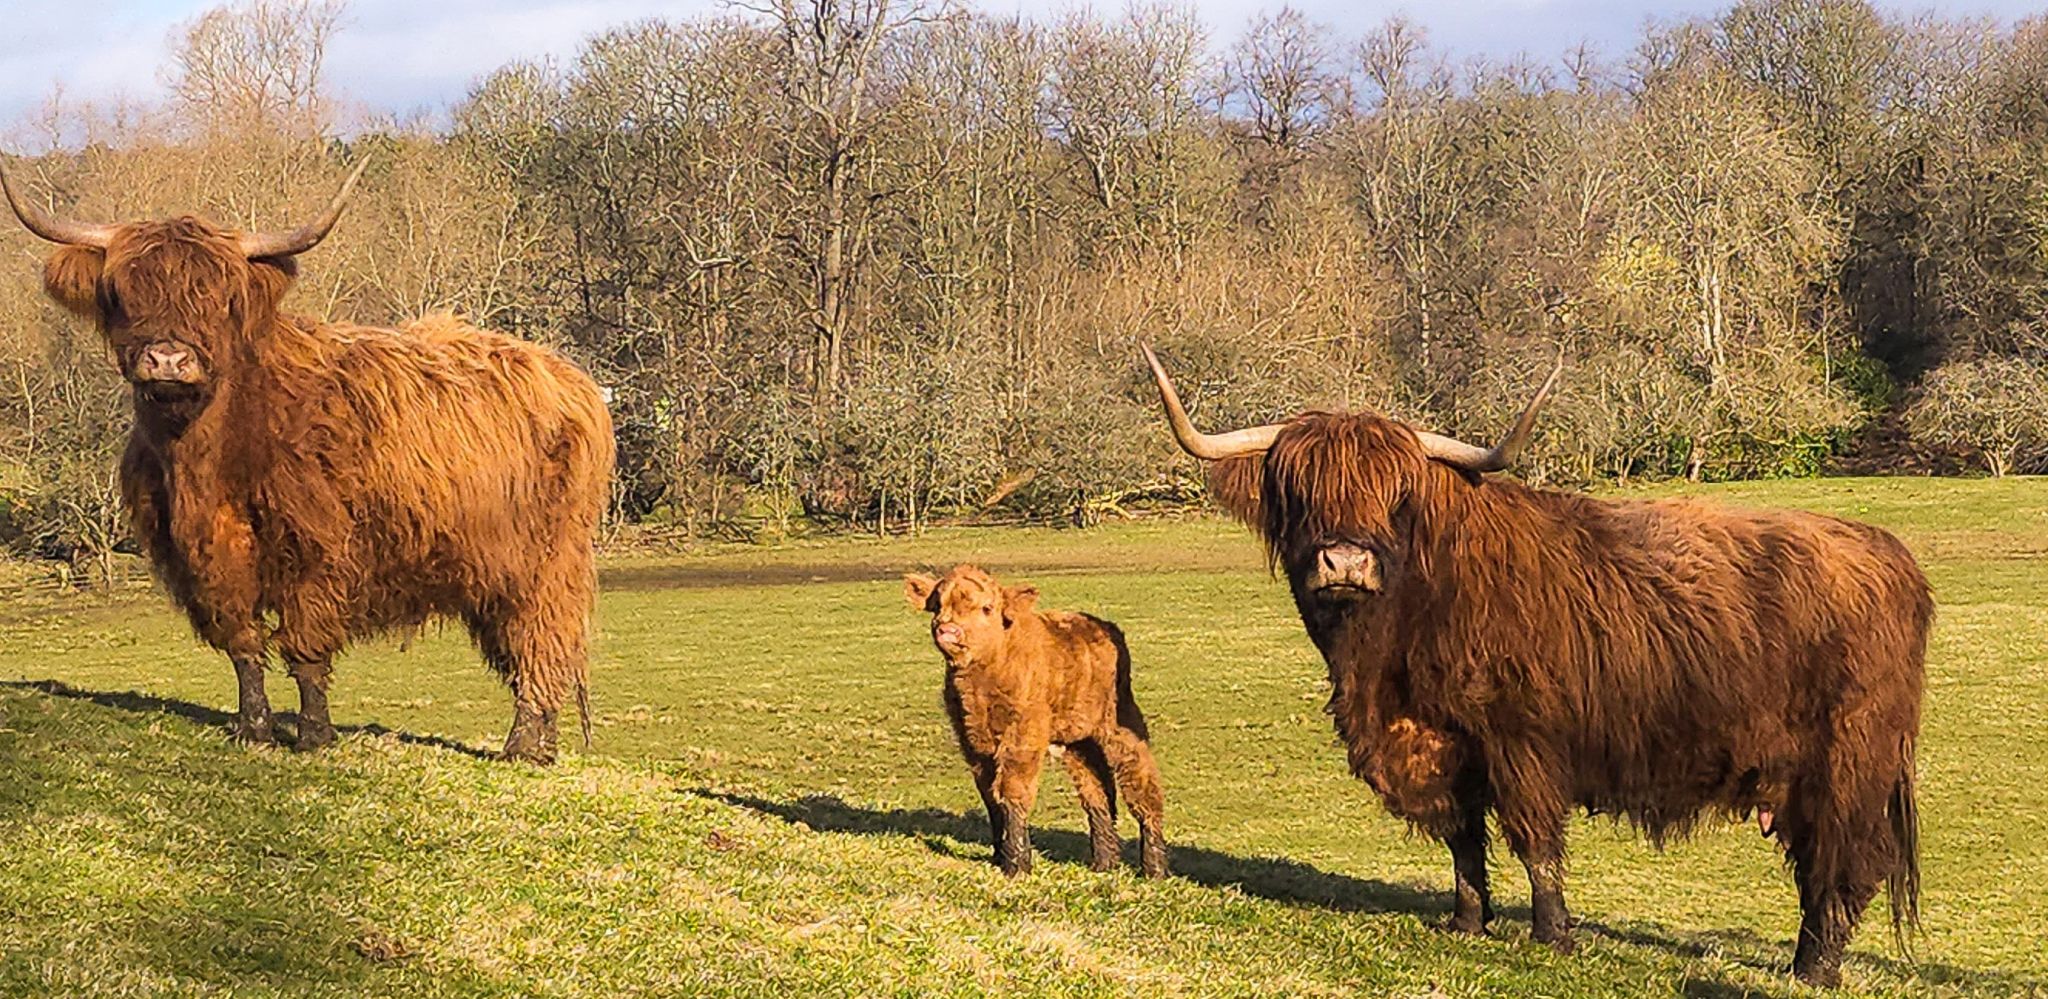 Highland Cattle in Pollock Country Park